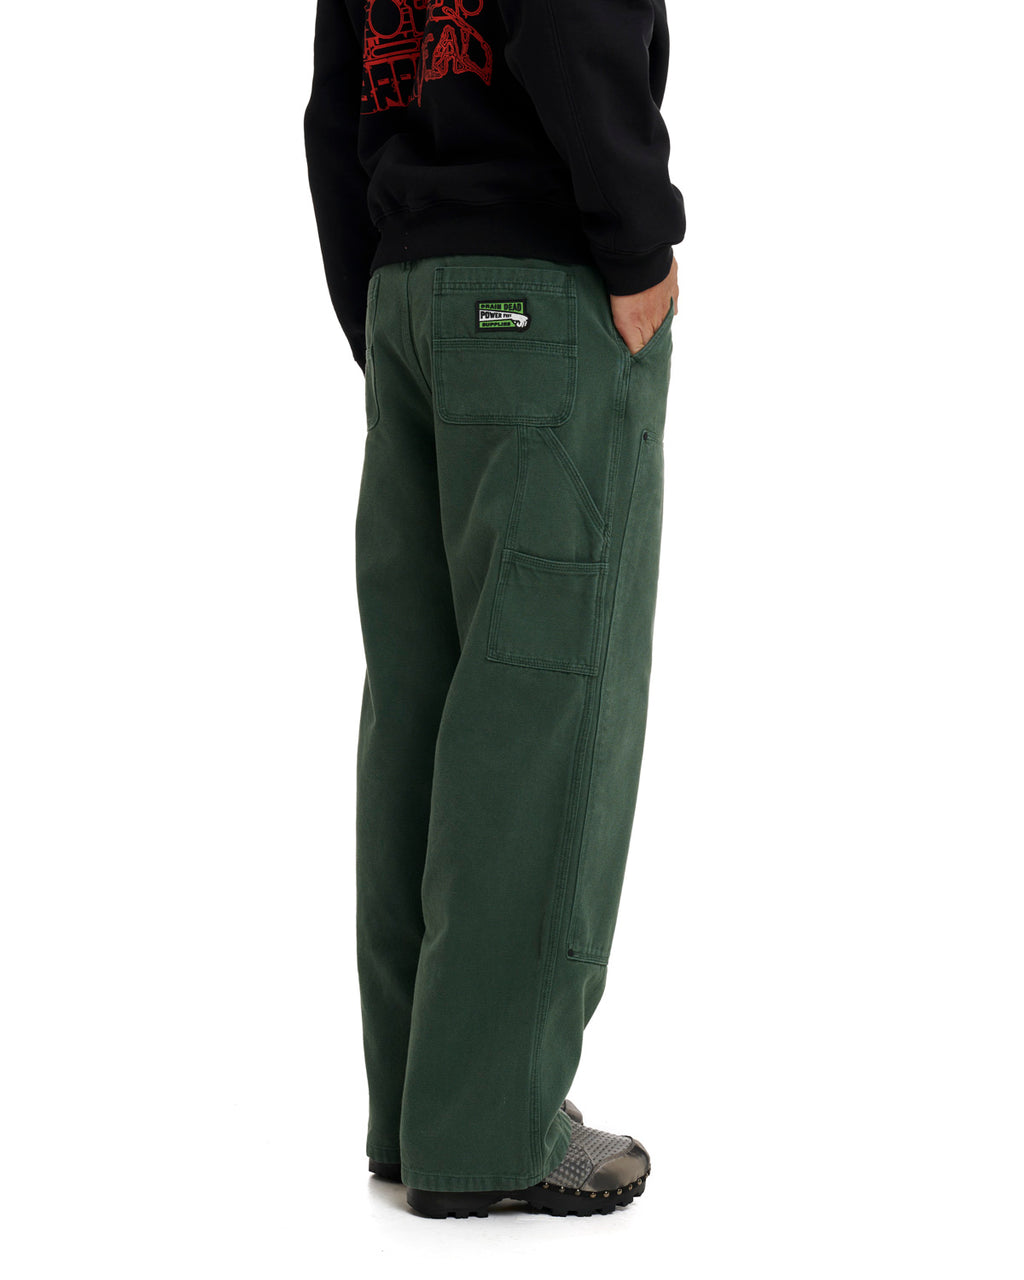 Double Knee Utility Pant - Putty Green 7